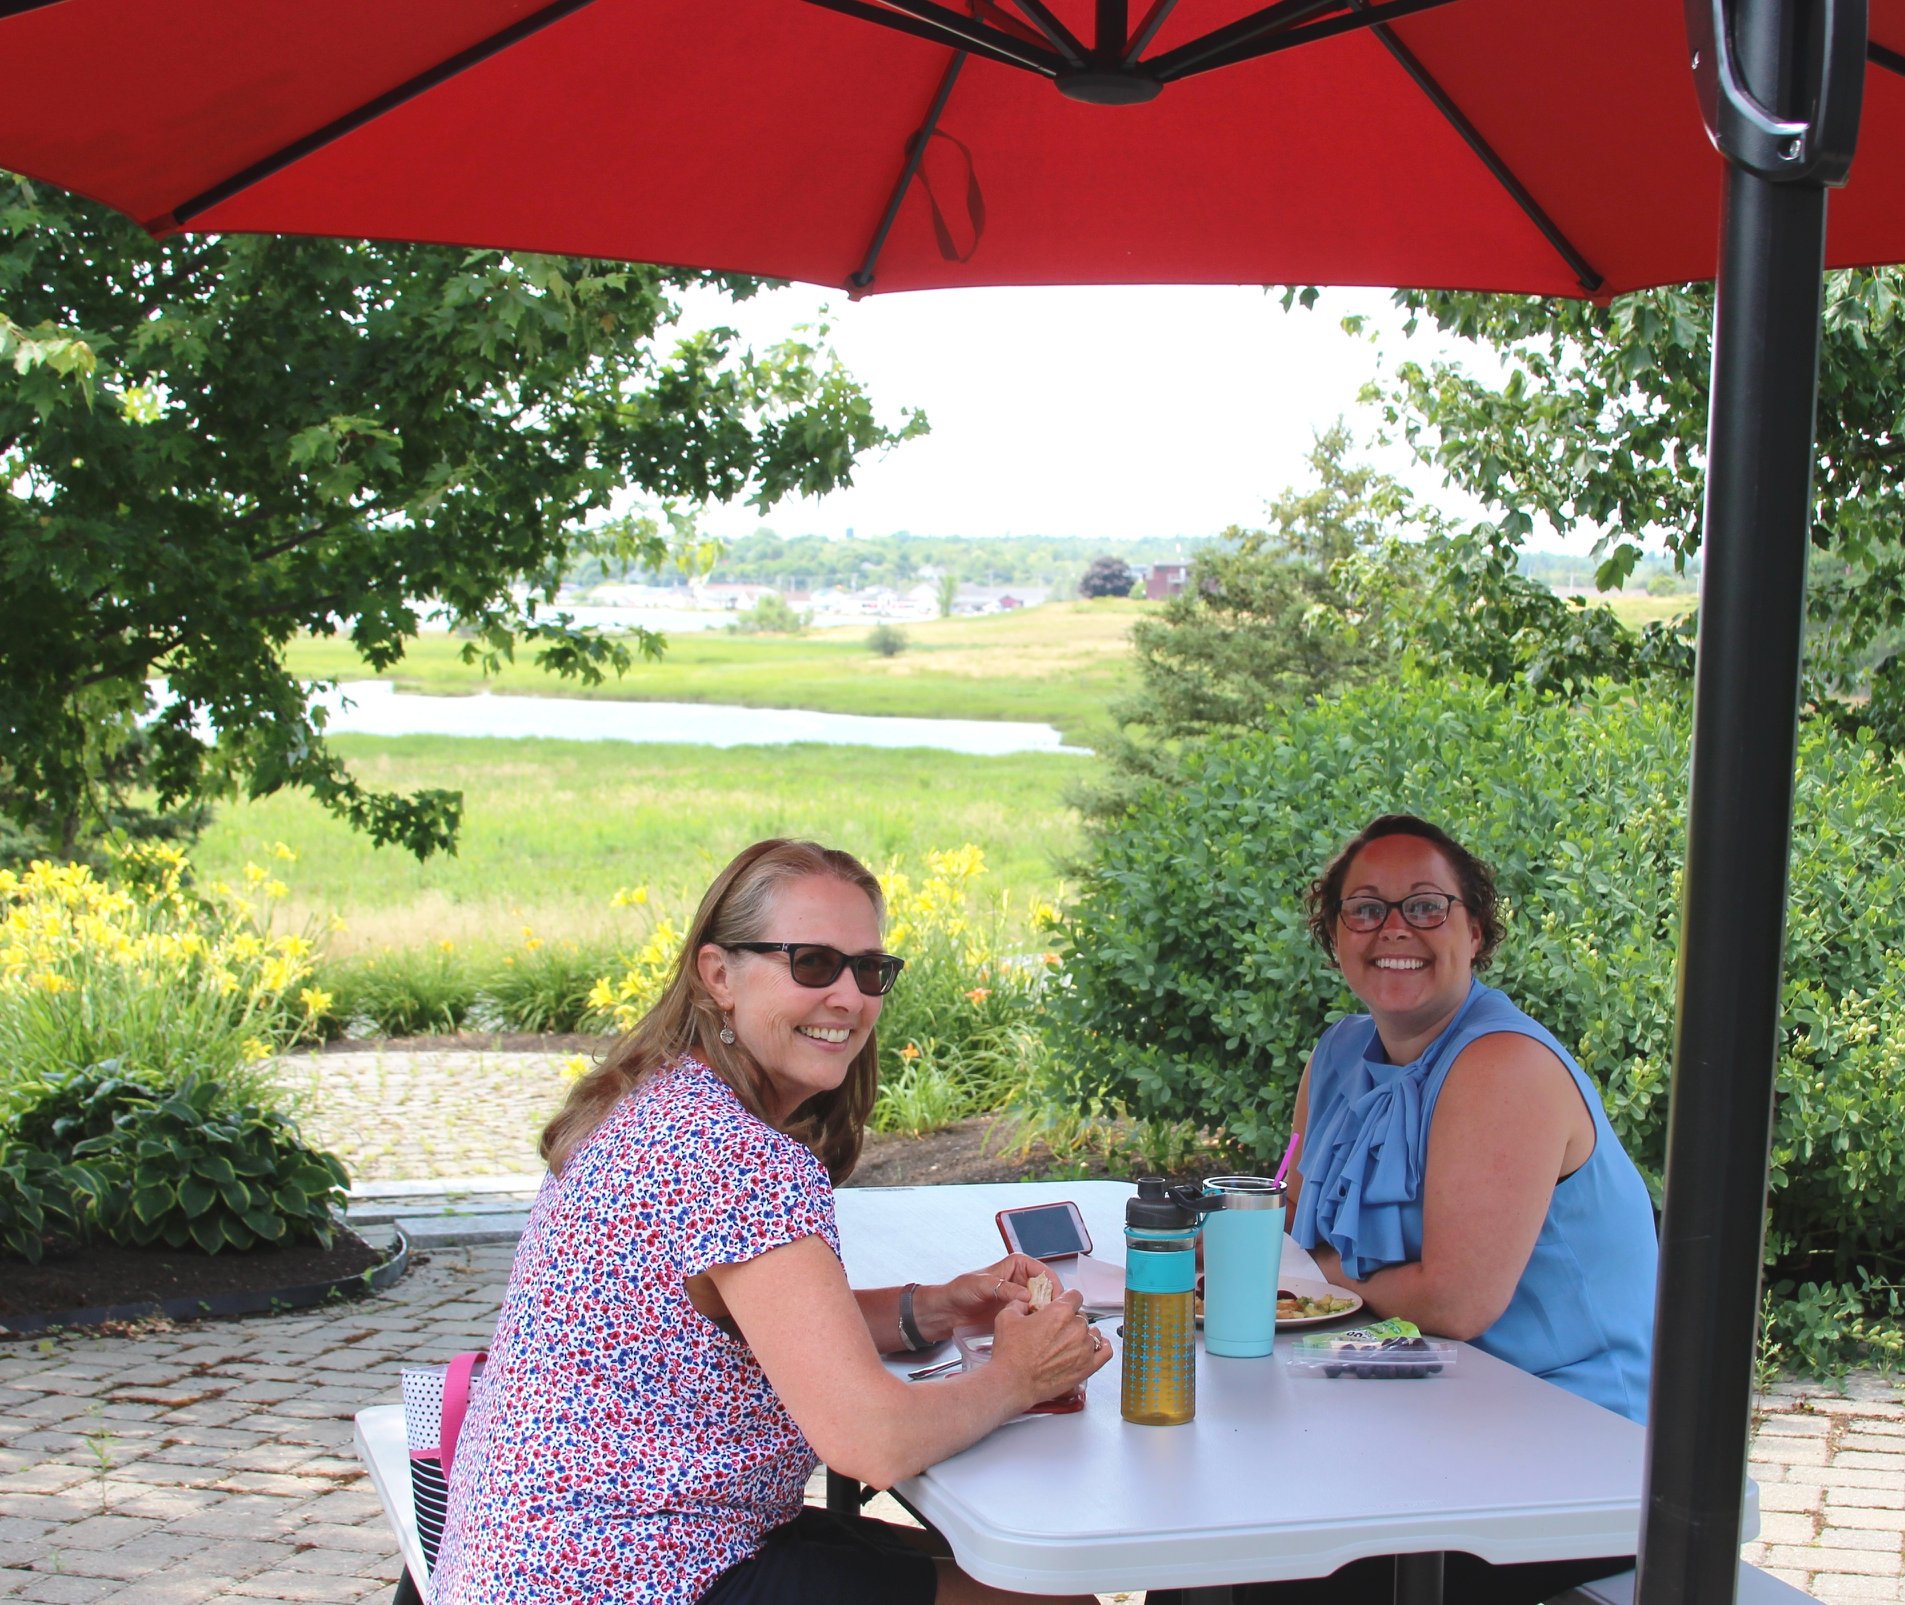 Grace and Devon took advantage of a glorious summer weather day by enjoying lunch on the patio